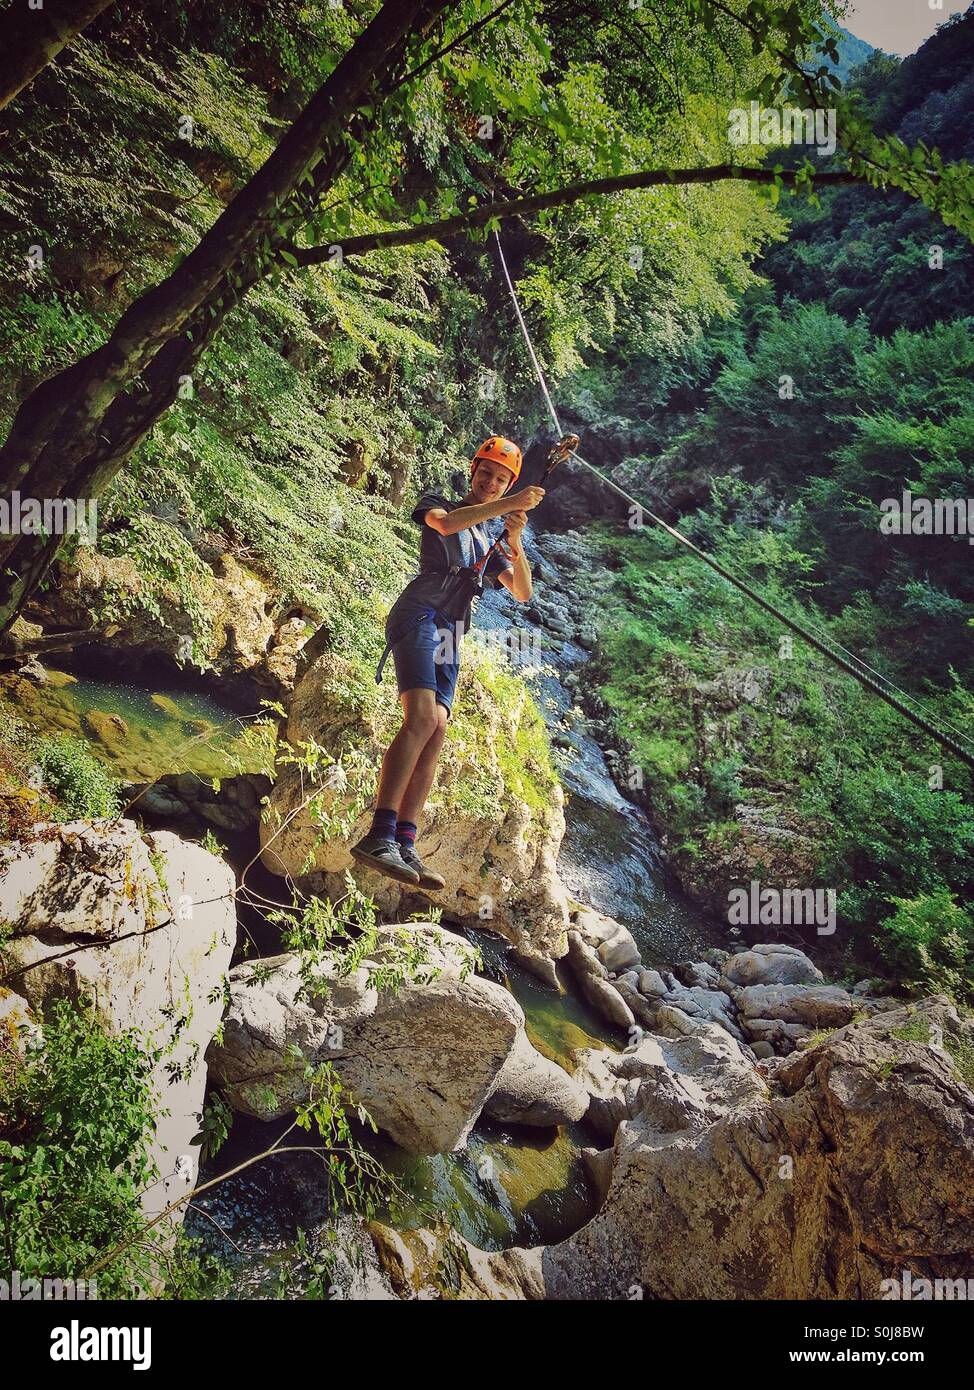 Teenage boy on a zip wire Bagni Di Lucca Italy Stock Photo